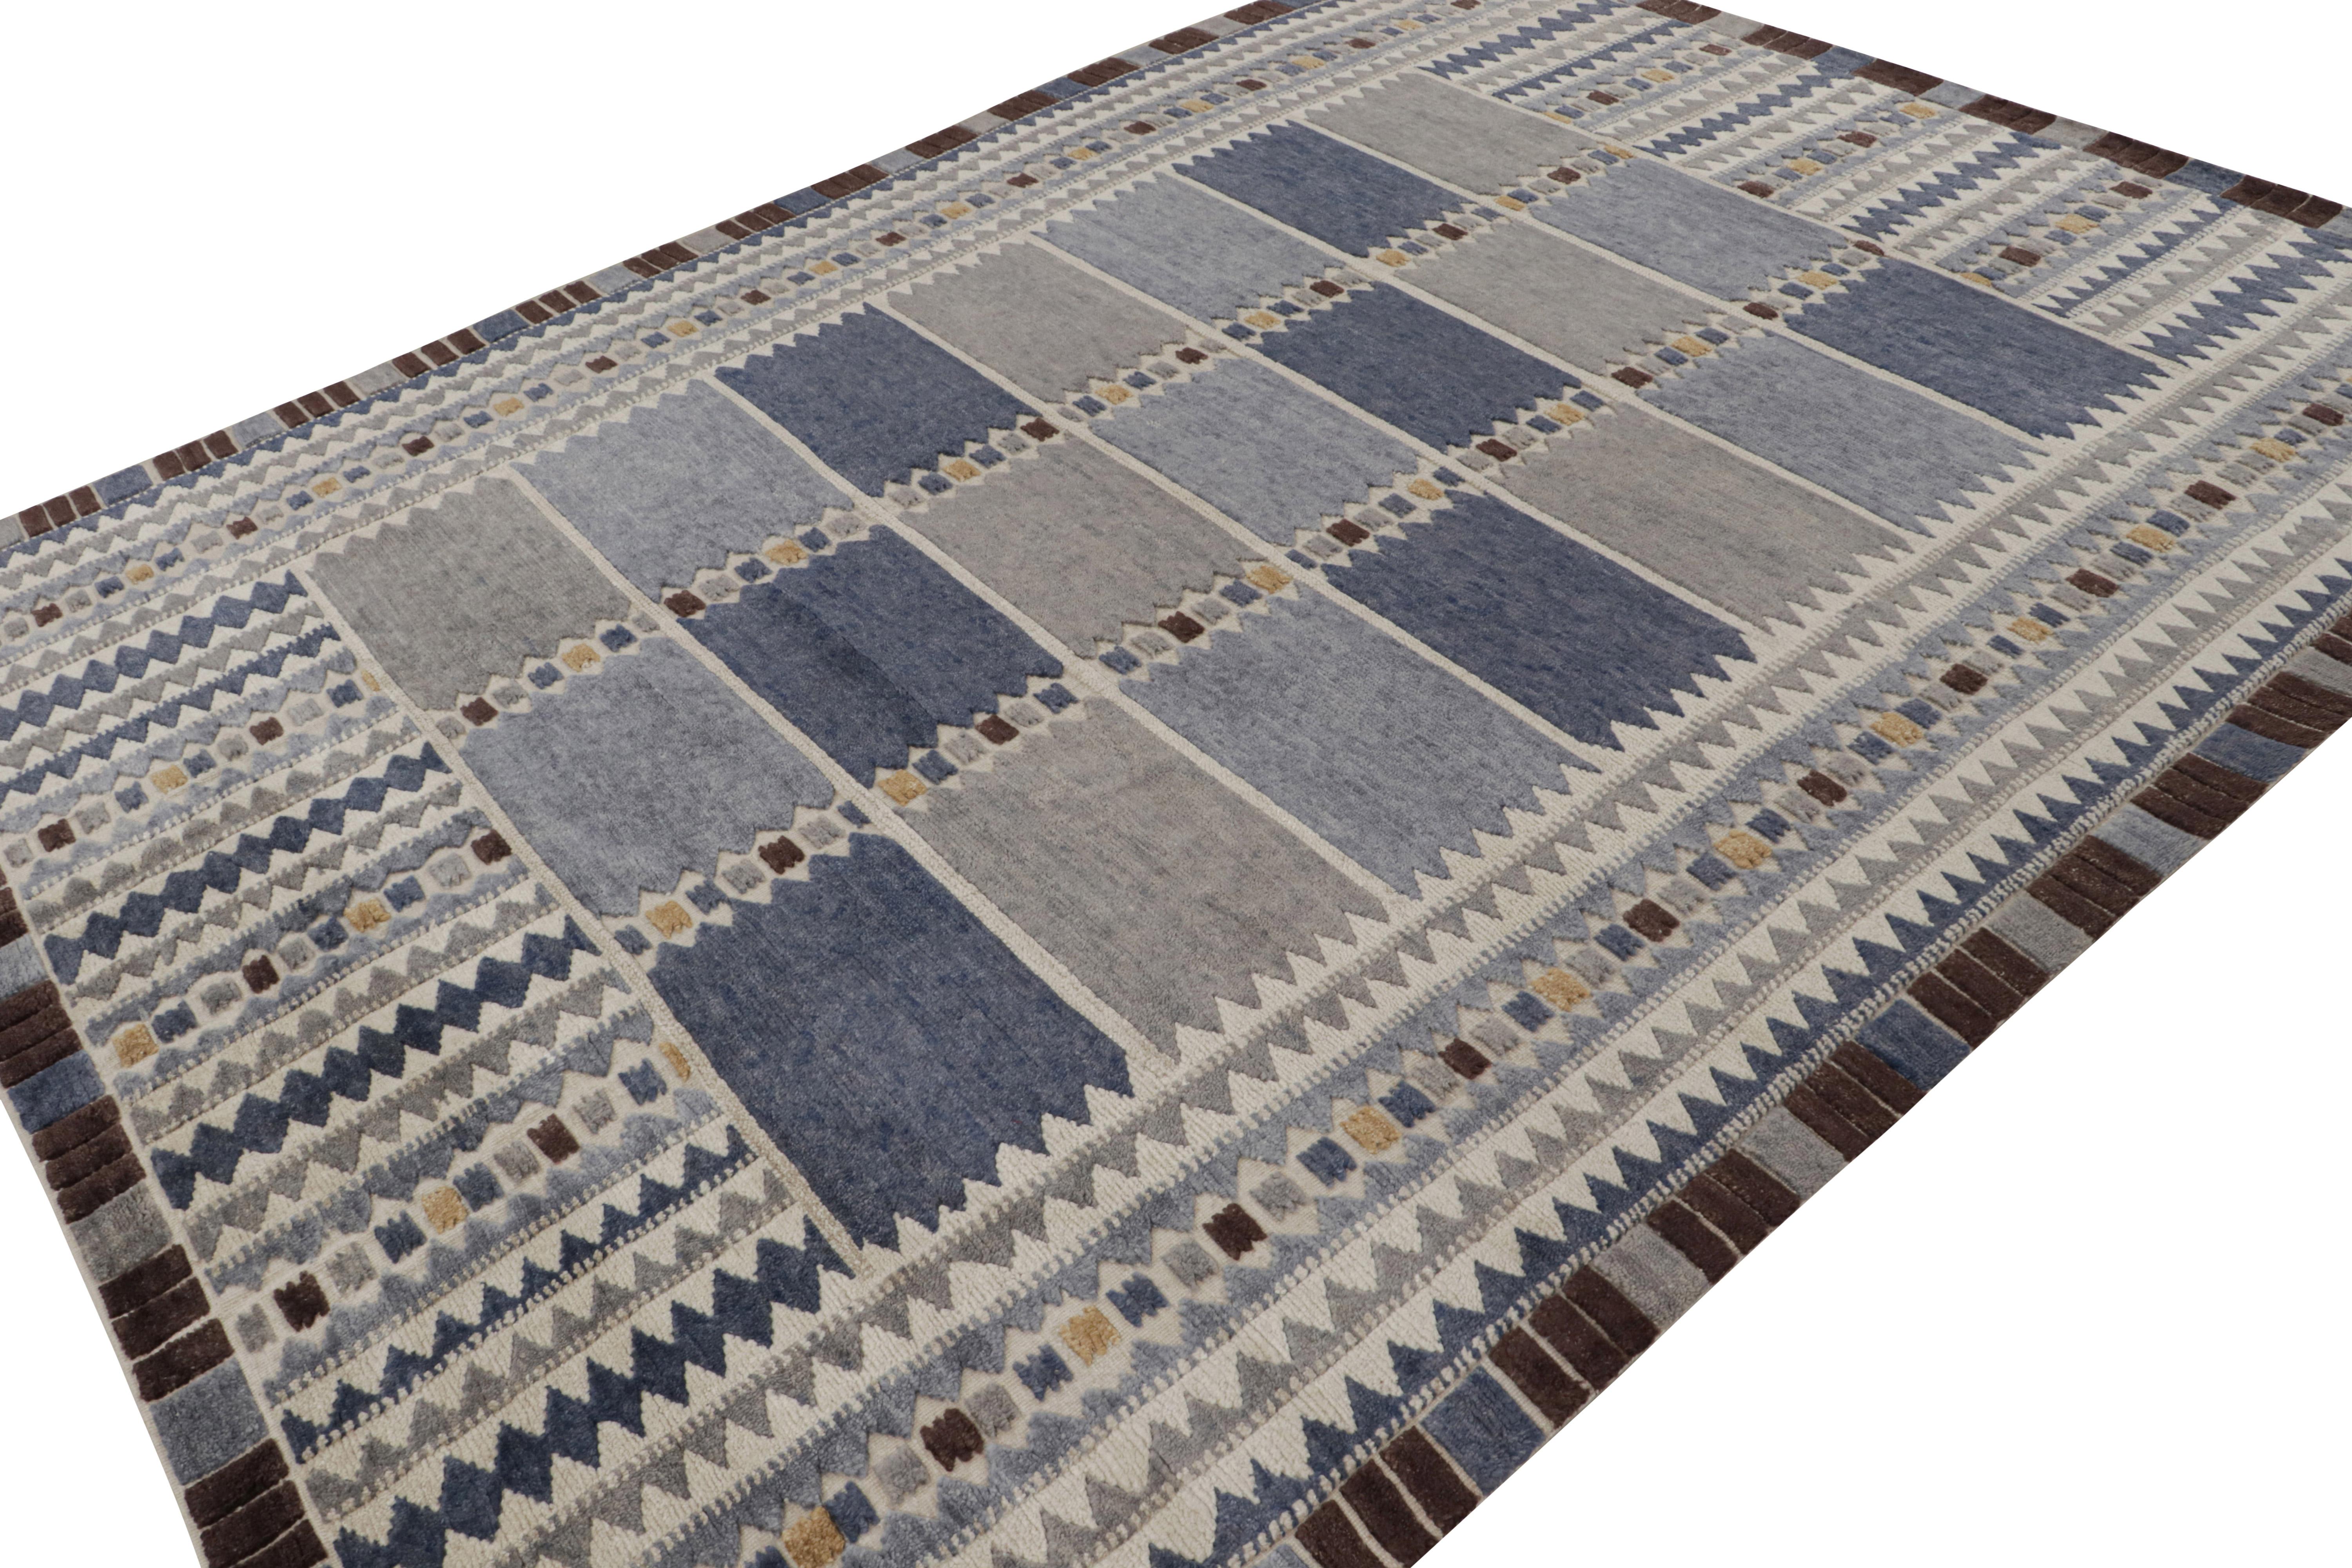 Hand-knotted in wool and undyed natural yarns, this custom rug design represents the Scandinavian Collection by Rug & Kilim—a modern take on the Swedish Deco style of Rollakan and Rya rugs. 

On the Design:

These photos represent a 9x12 rug with